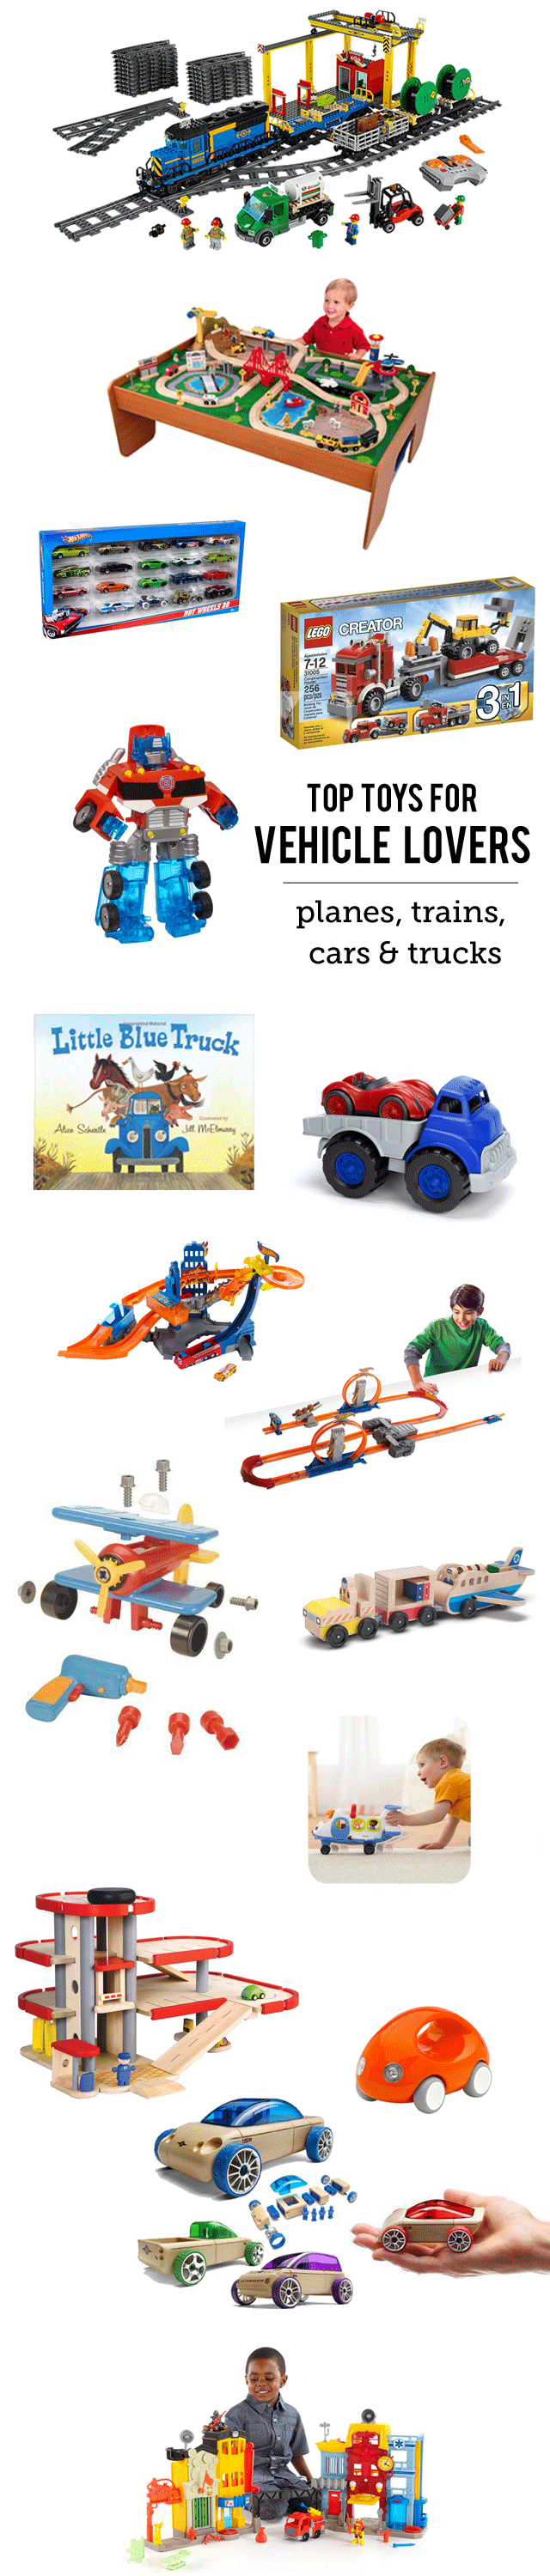 MPMK Toy Gift Guide: Best toy trucks, best toy cars, best train tables and more - Part of 15 awesome gift guides with tons of info. and age recommendations for each pick.